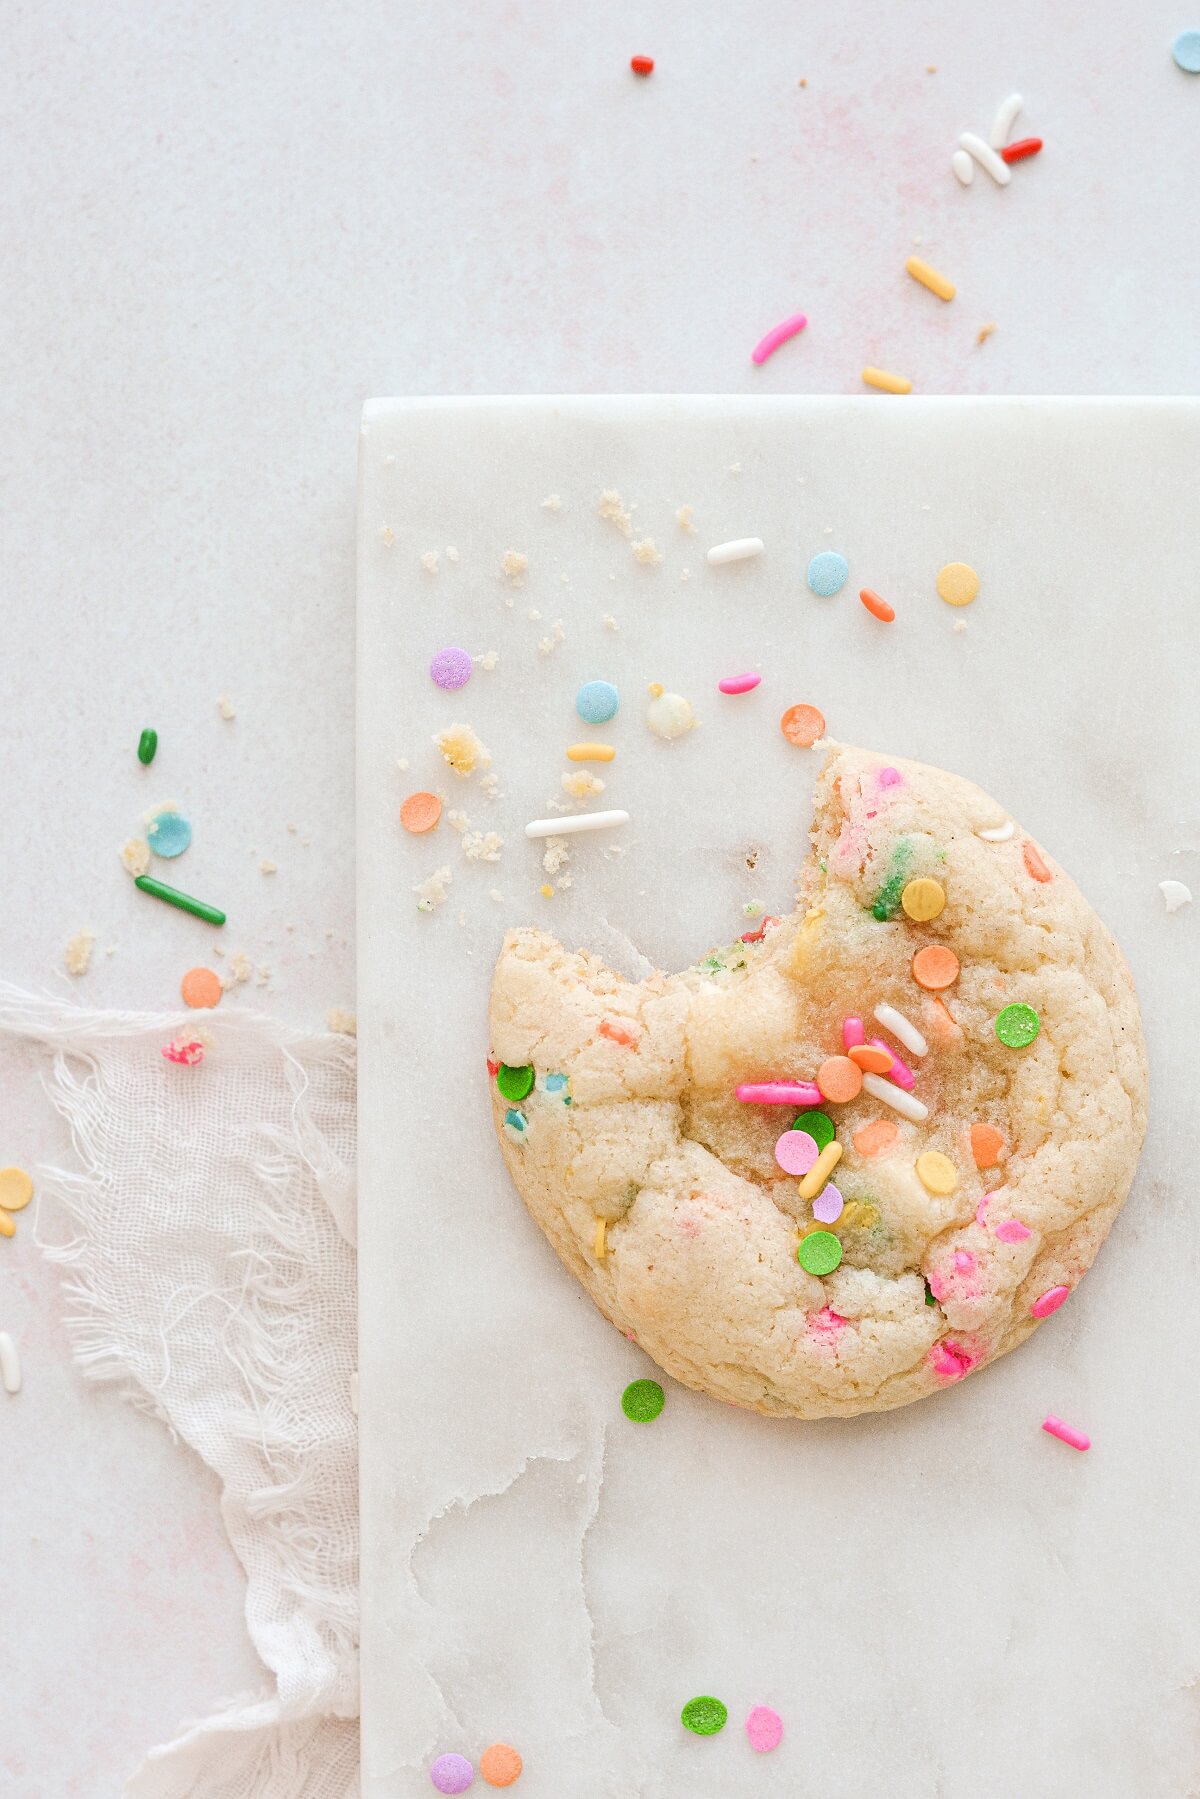 A sprinkle cookie with a bite taken.